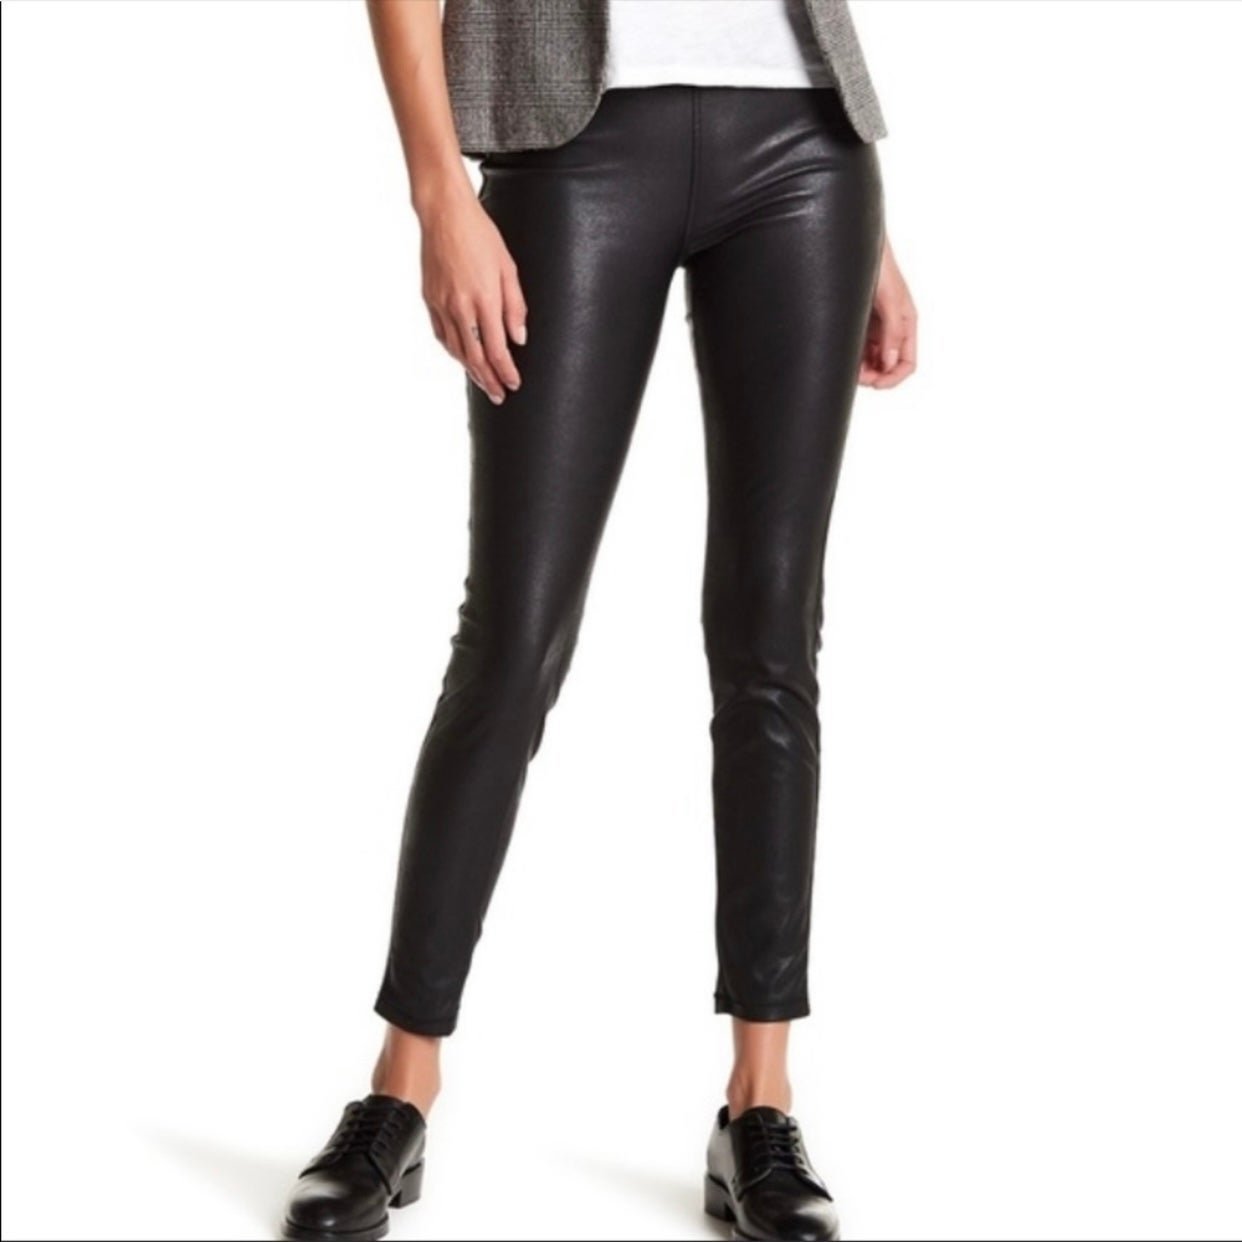 Gorgeous Blank NYC Black Faux Leather Leggings Size 28 